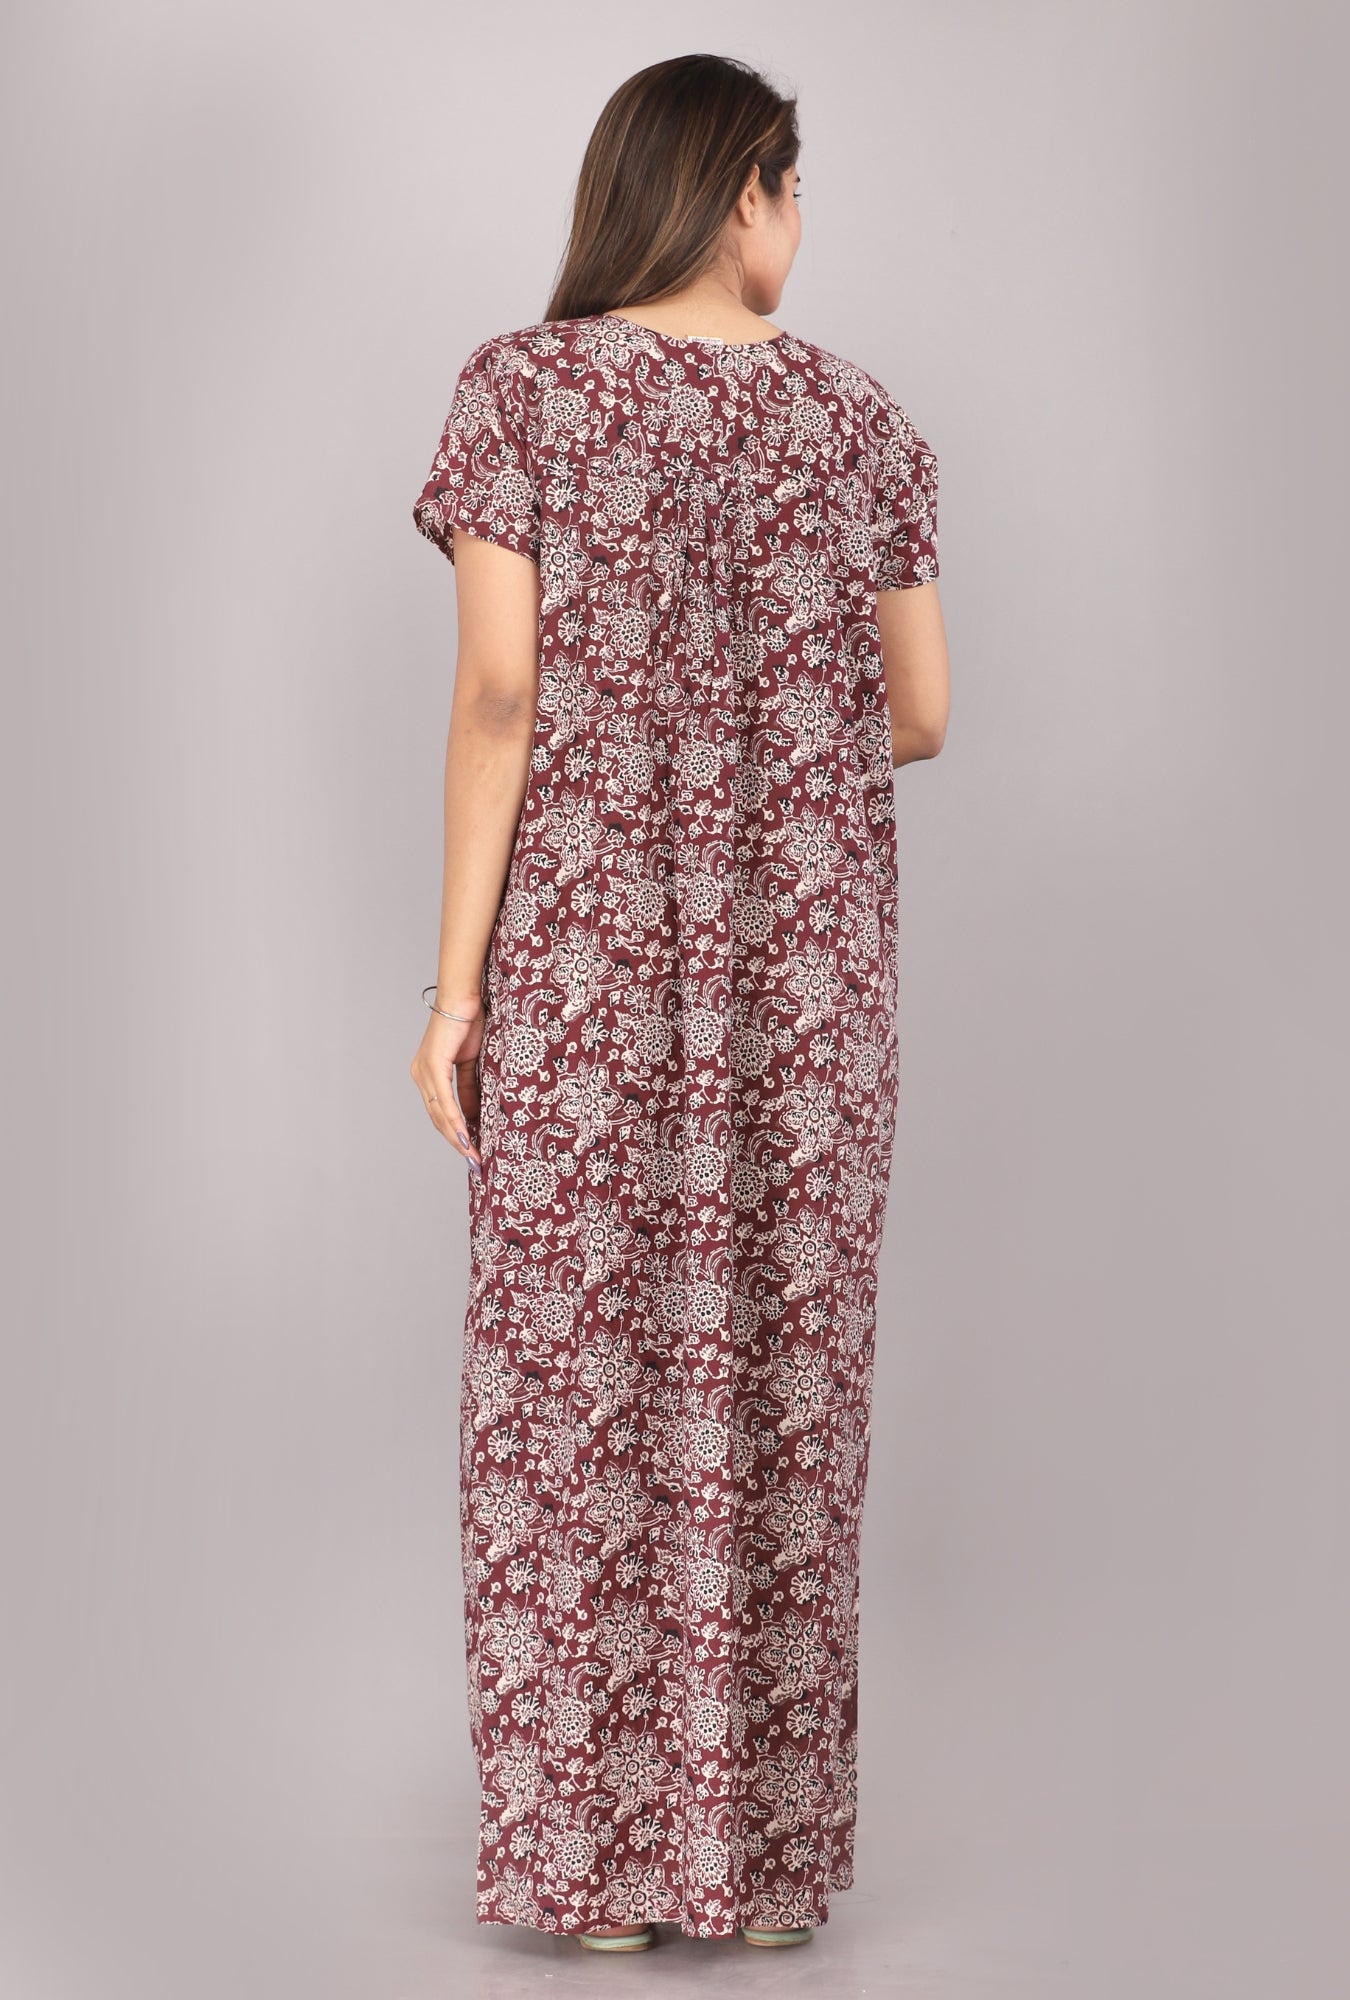 Chakra Flower Maroon Cotton Printed Night Gowns